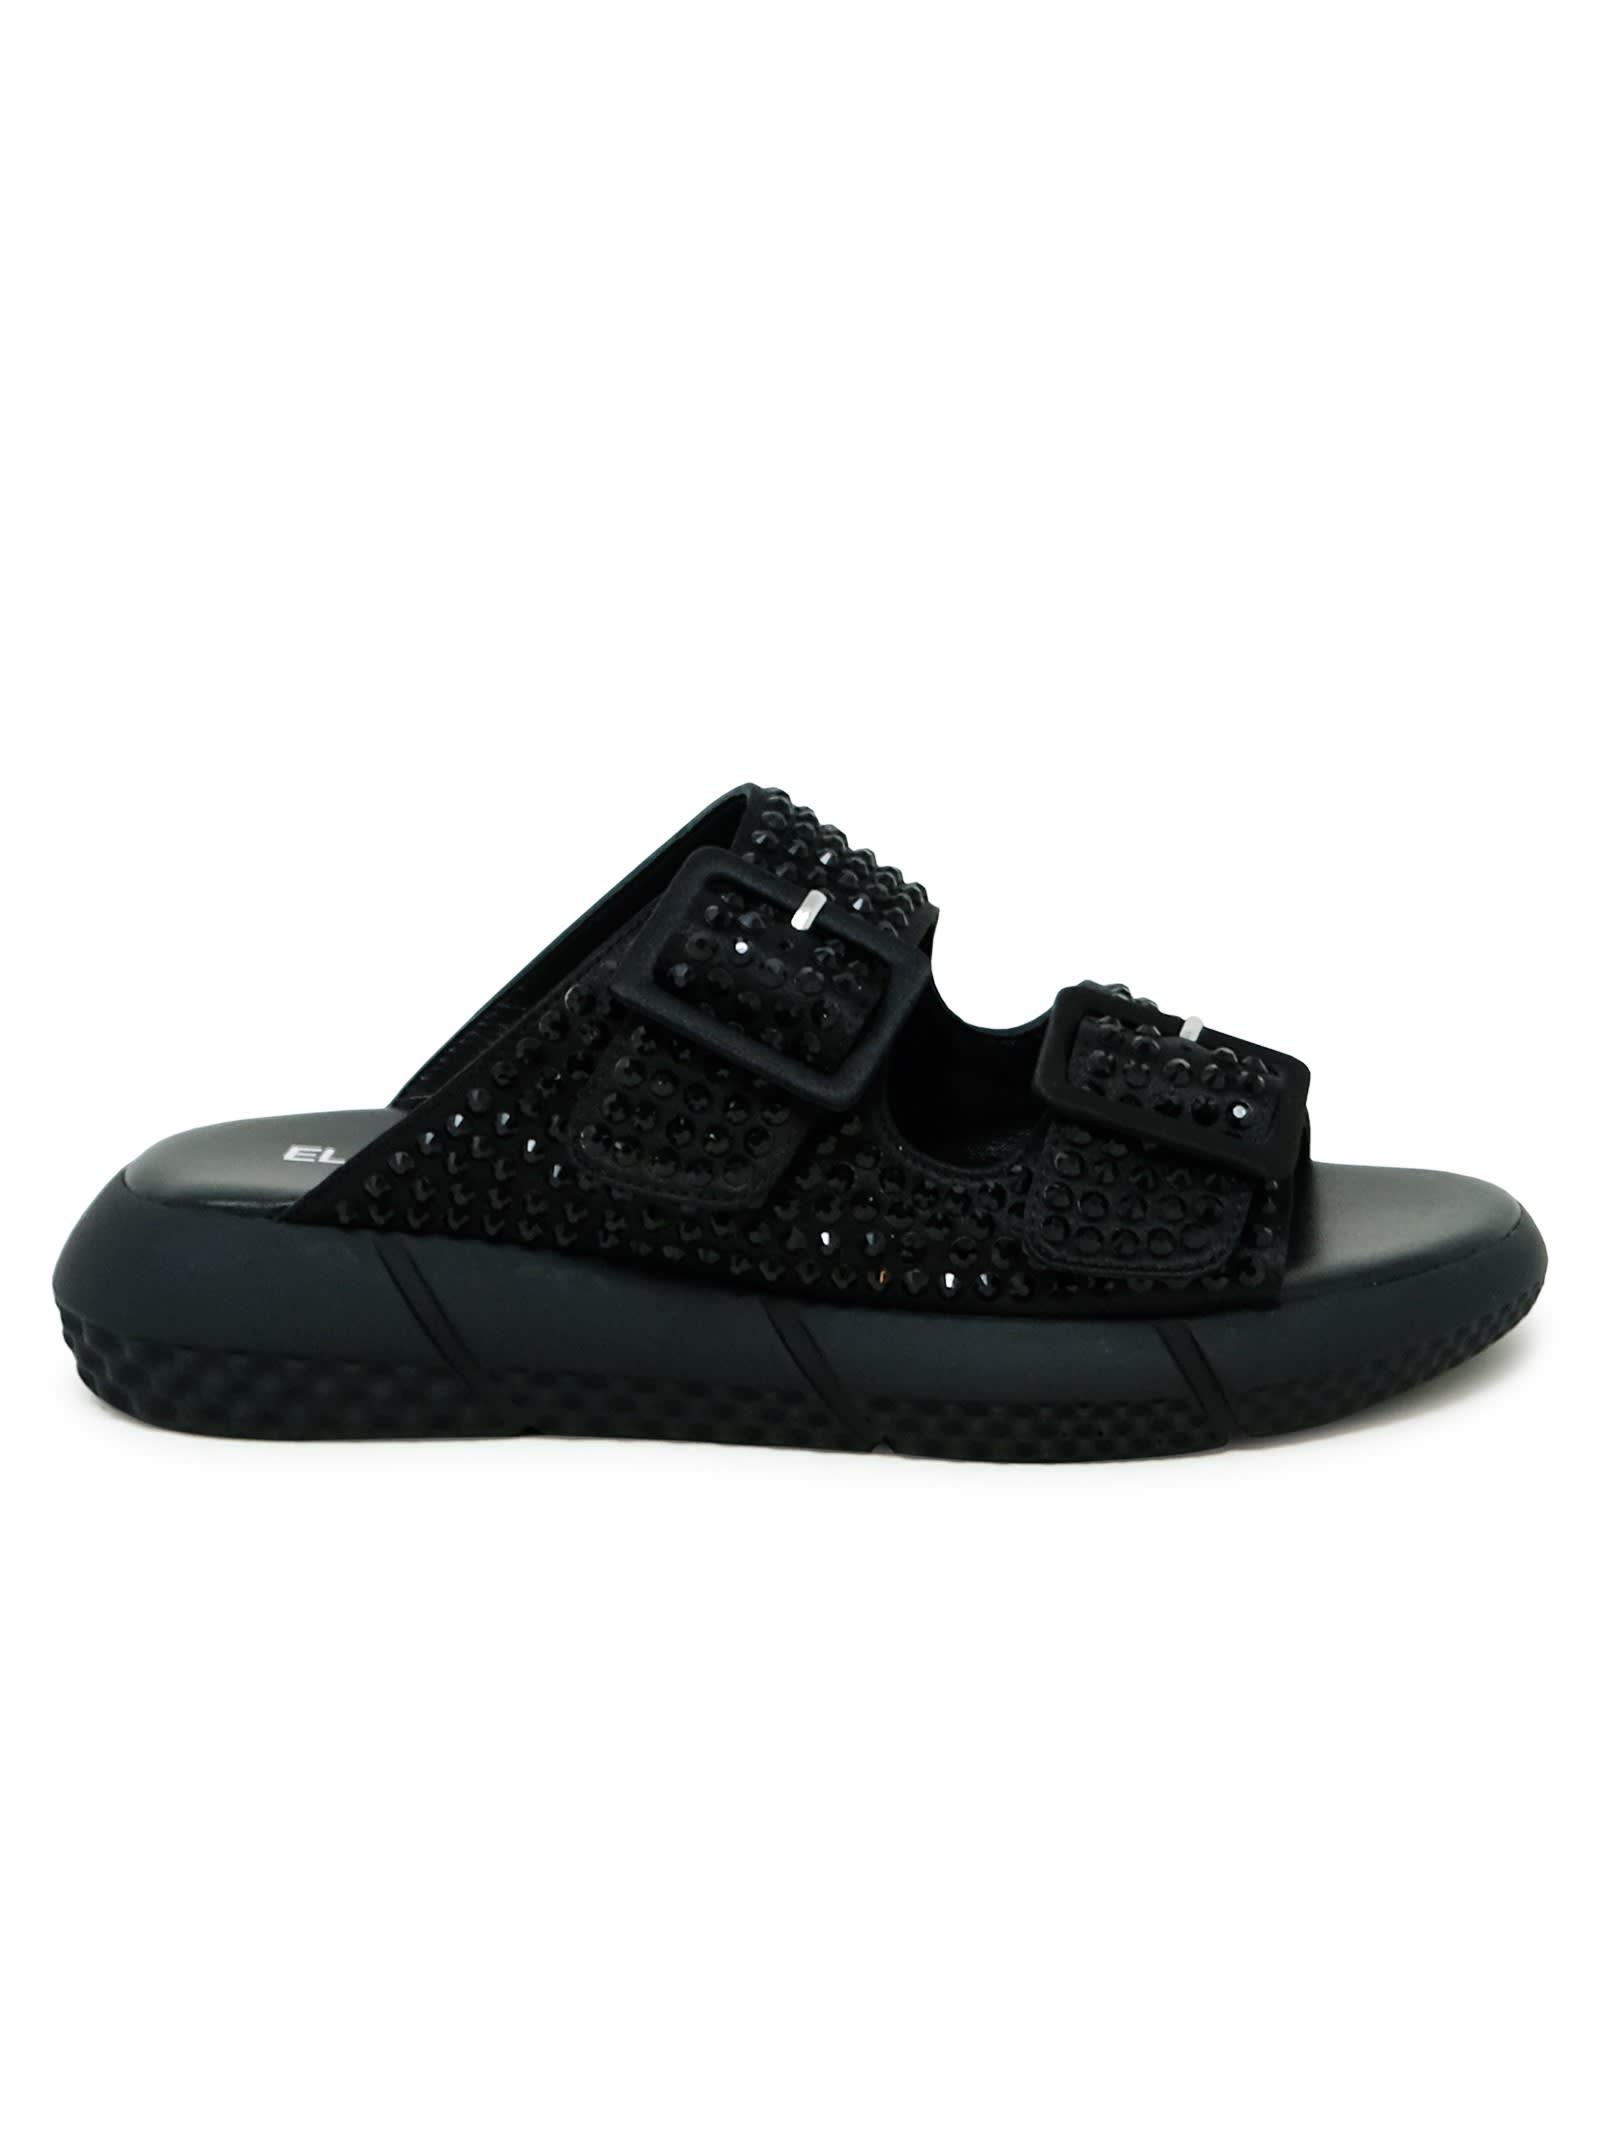 Black Leather Flat Sandals With Swarovsky